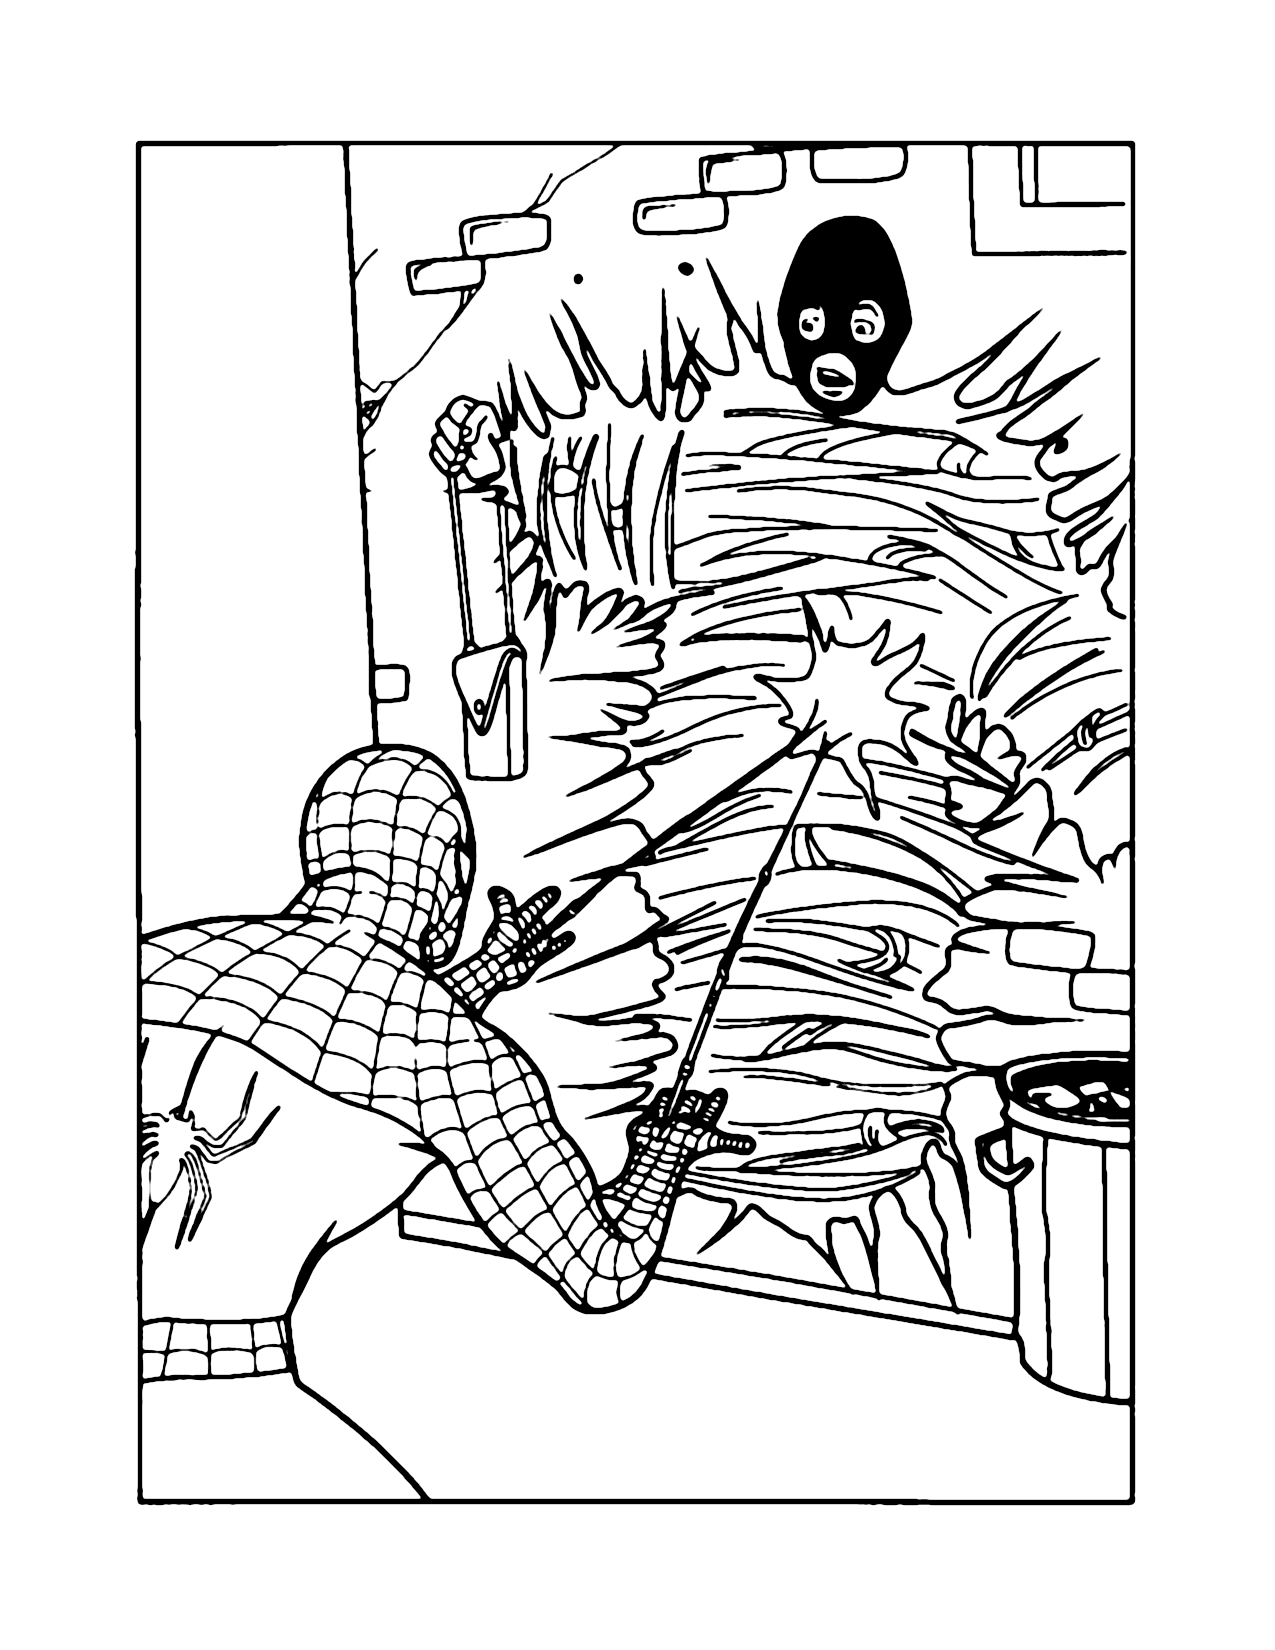 Spiderman Catching Bad Guy Coloring Page